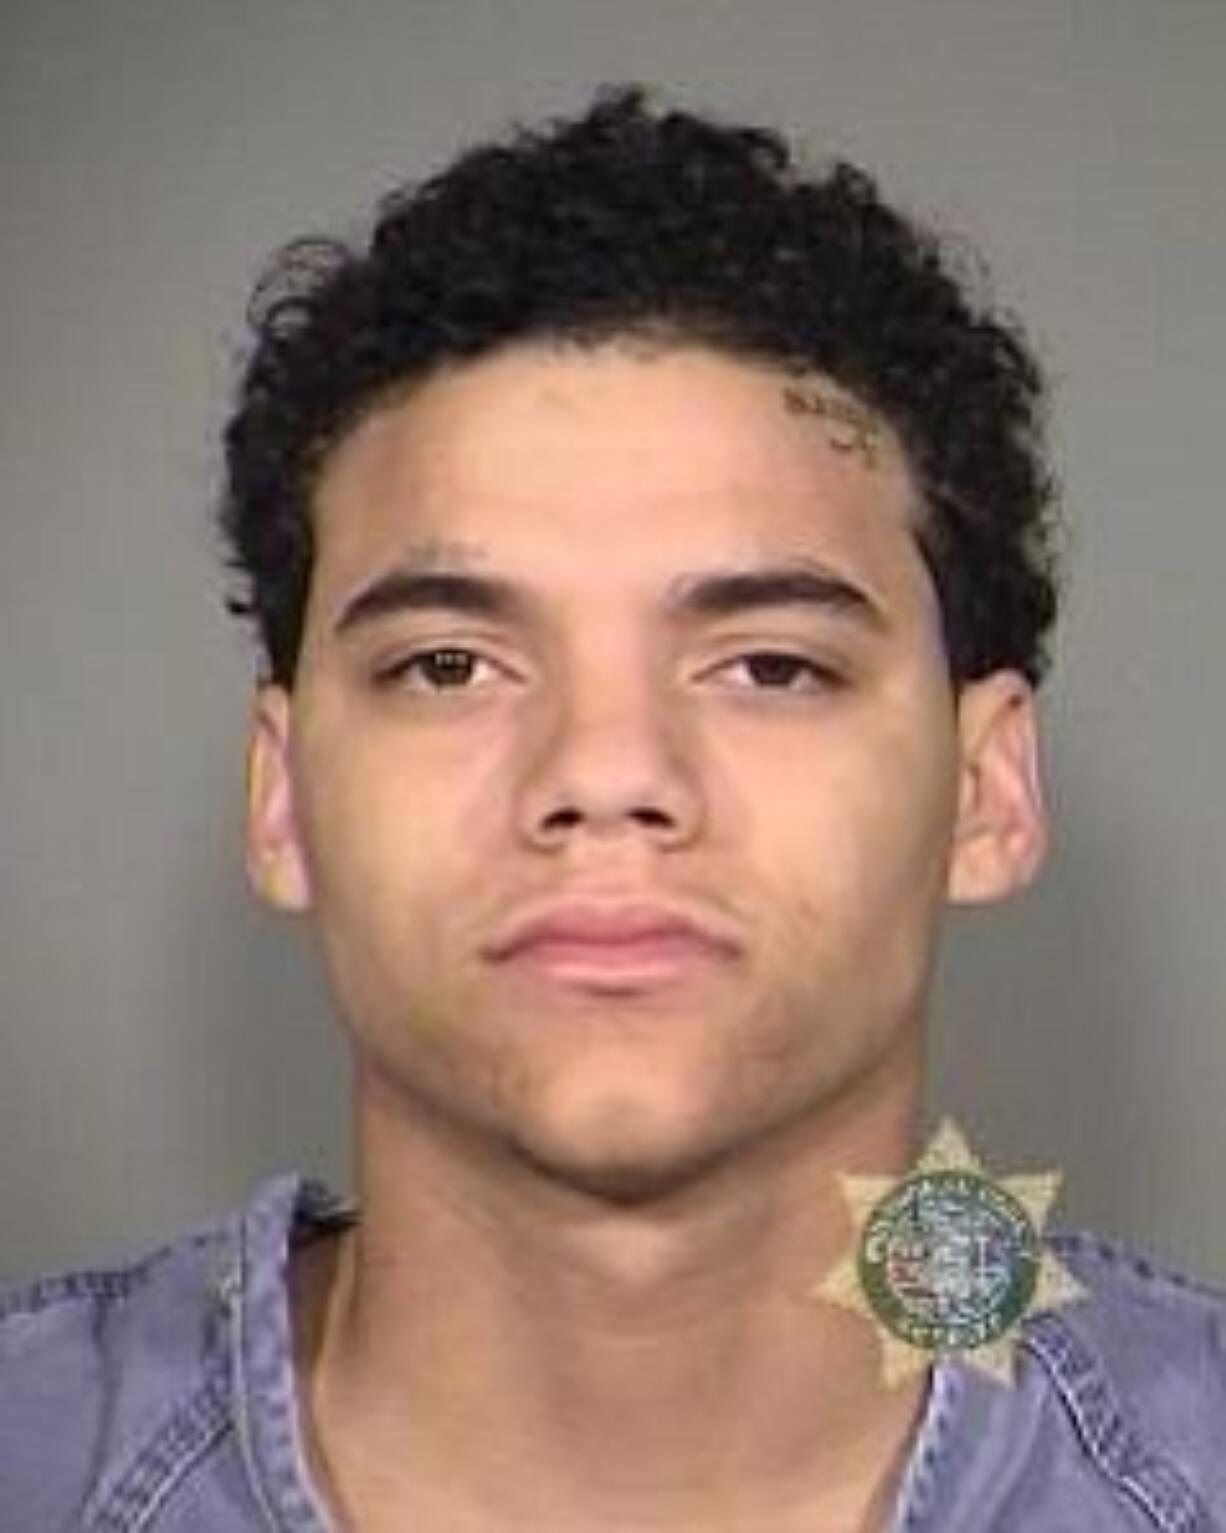 Ashawntae Rosemon, 18, arrested in Portland in alleged hit-run death of Vancouver man.